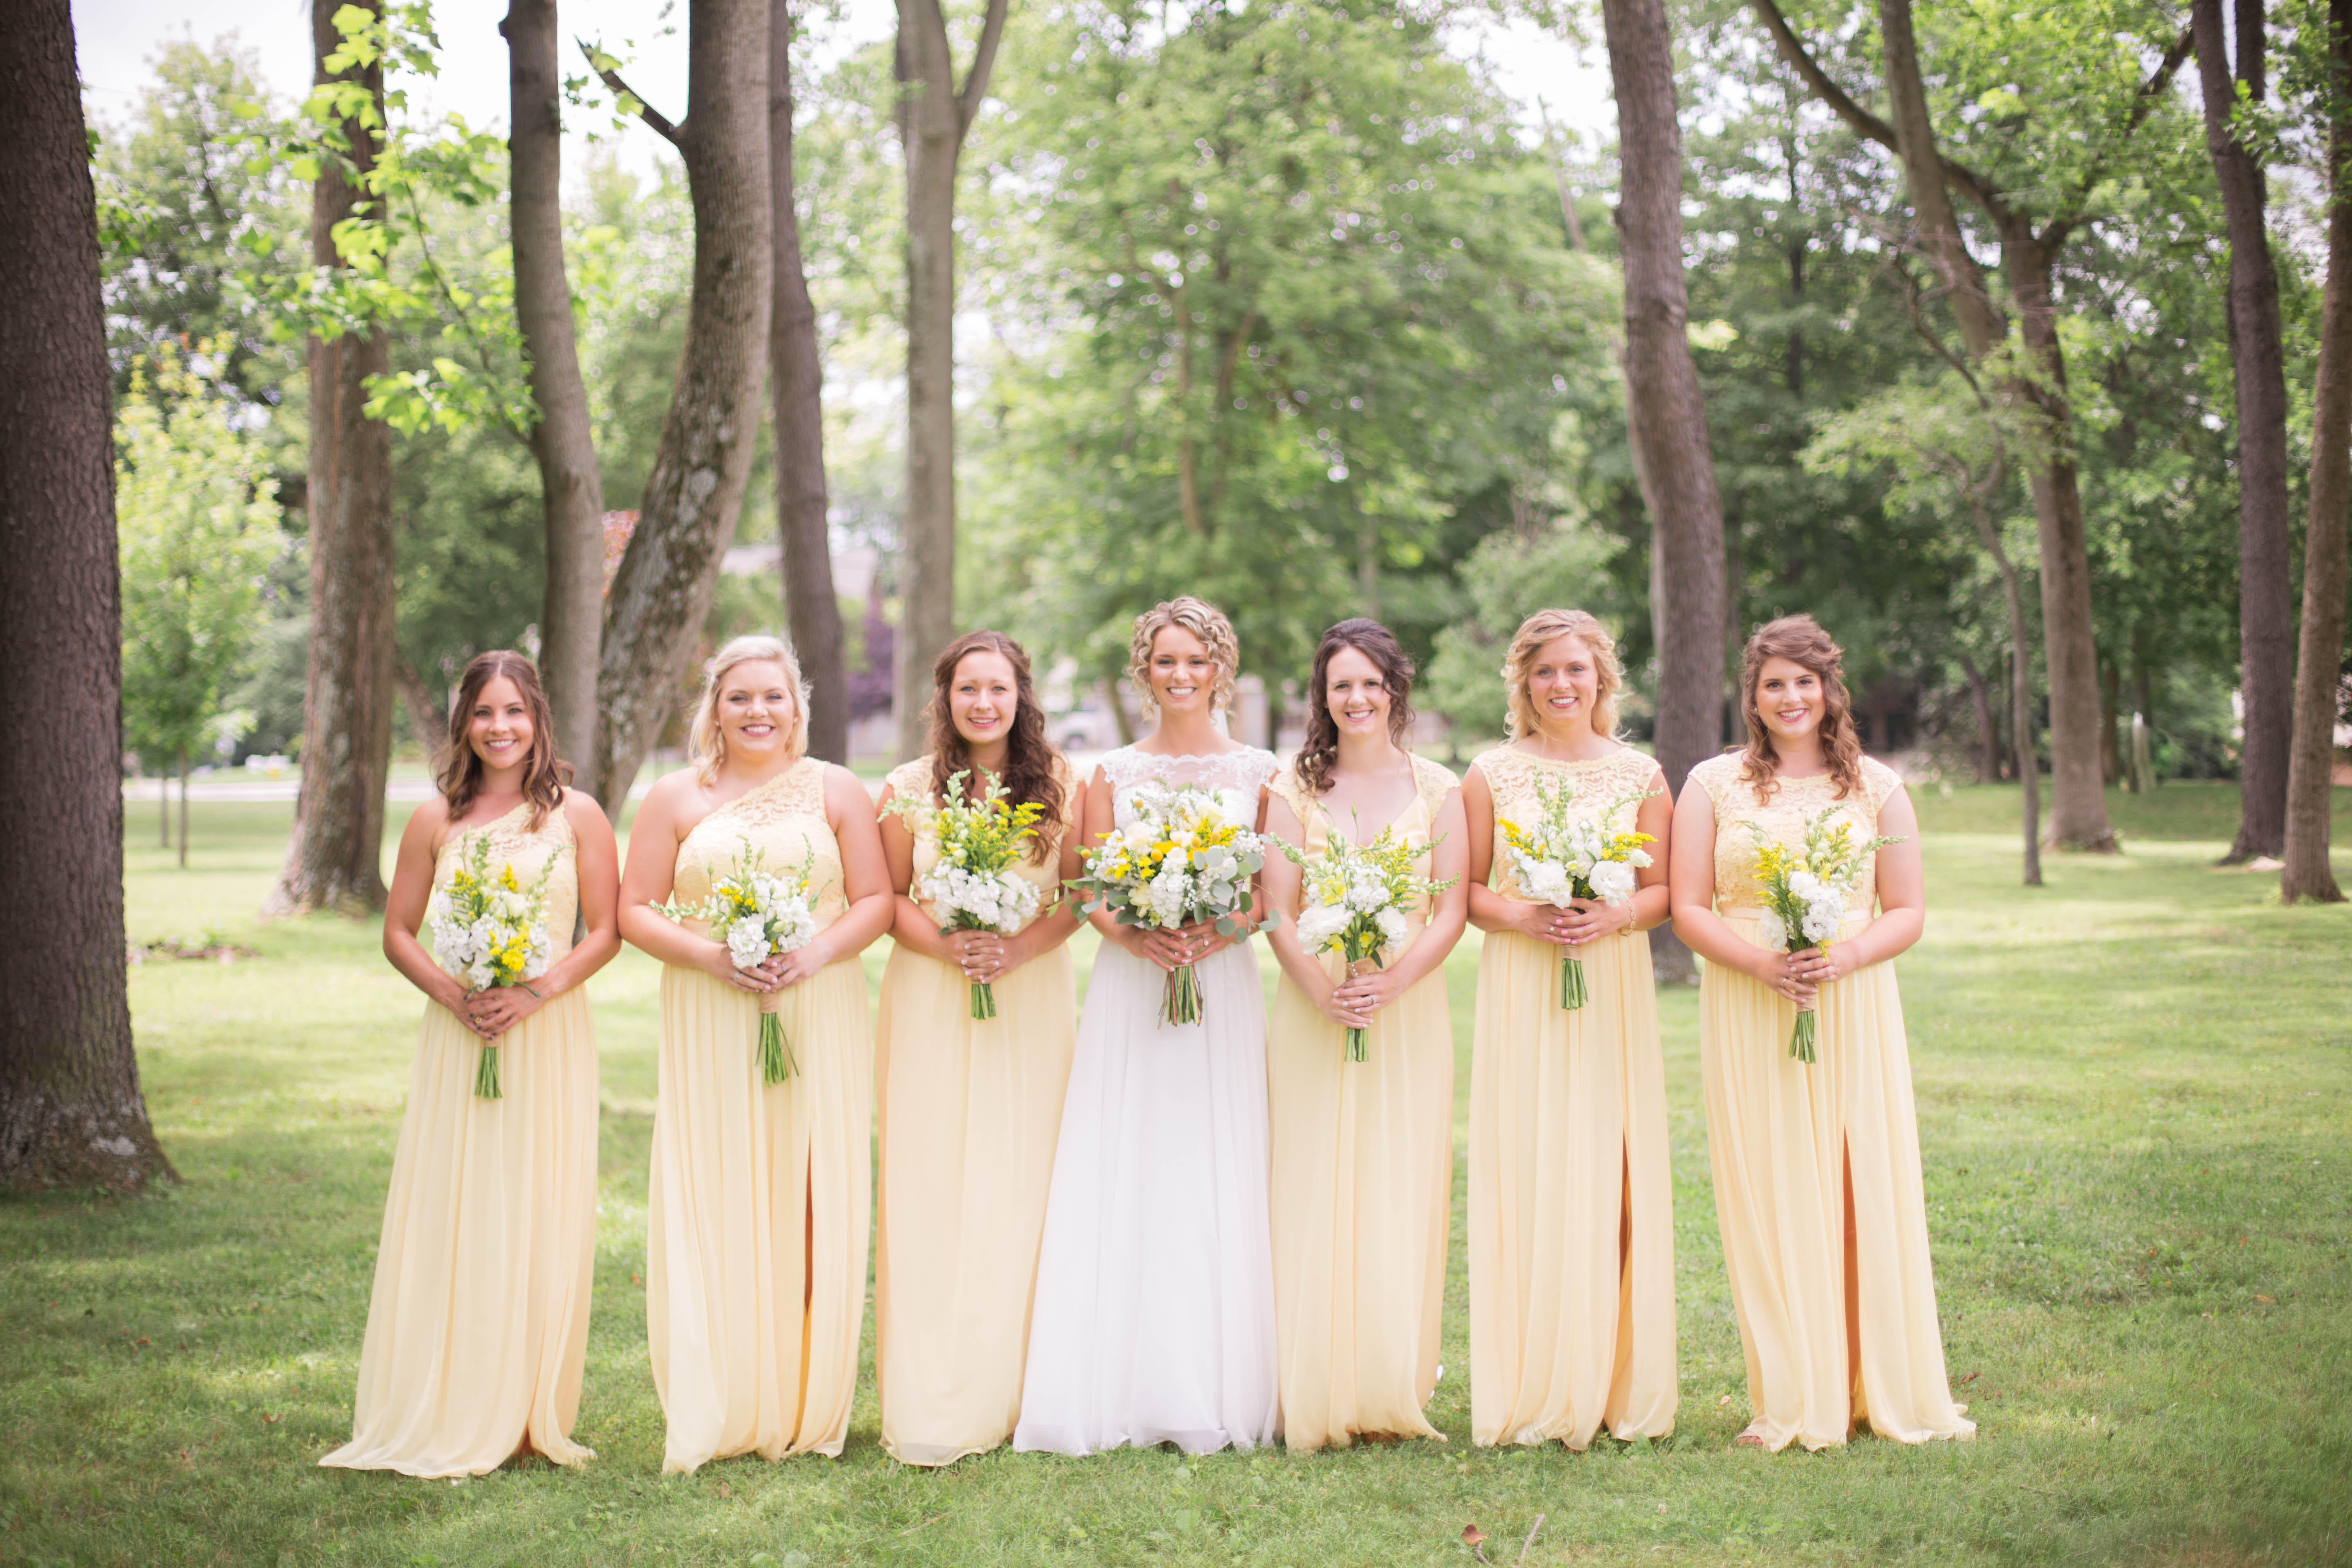 Tips for finding your Bridesmaid's Dresses | Monica Brown Photography | monicabrownphoto.com